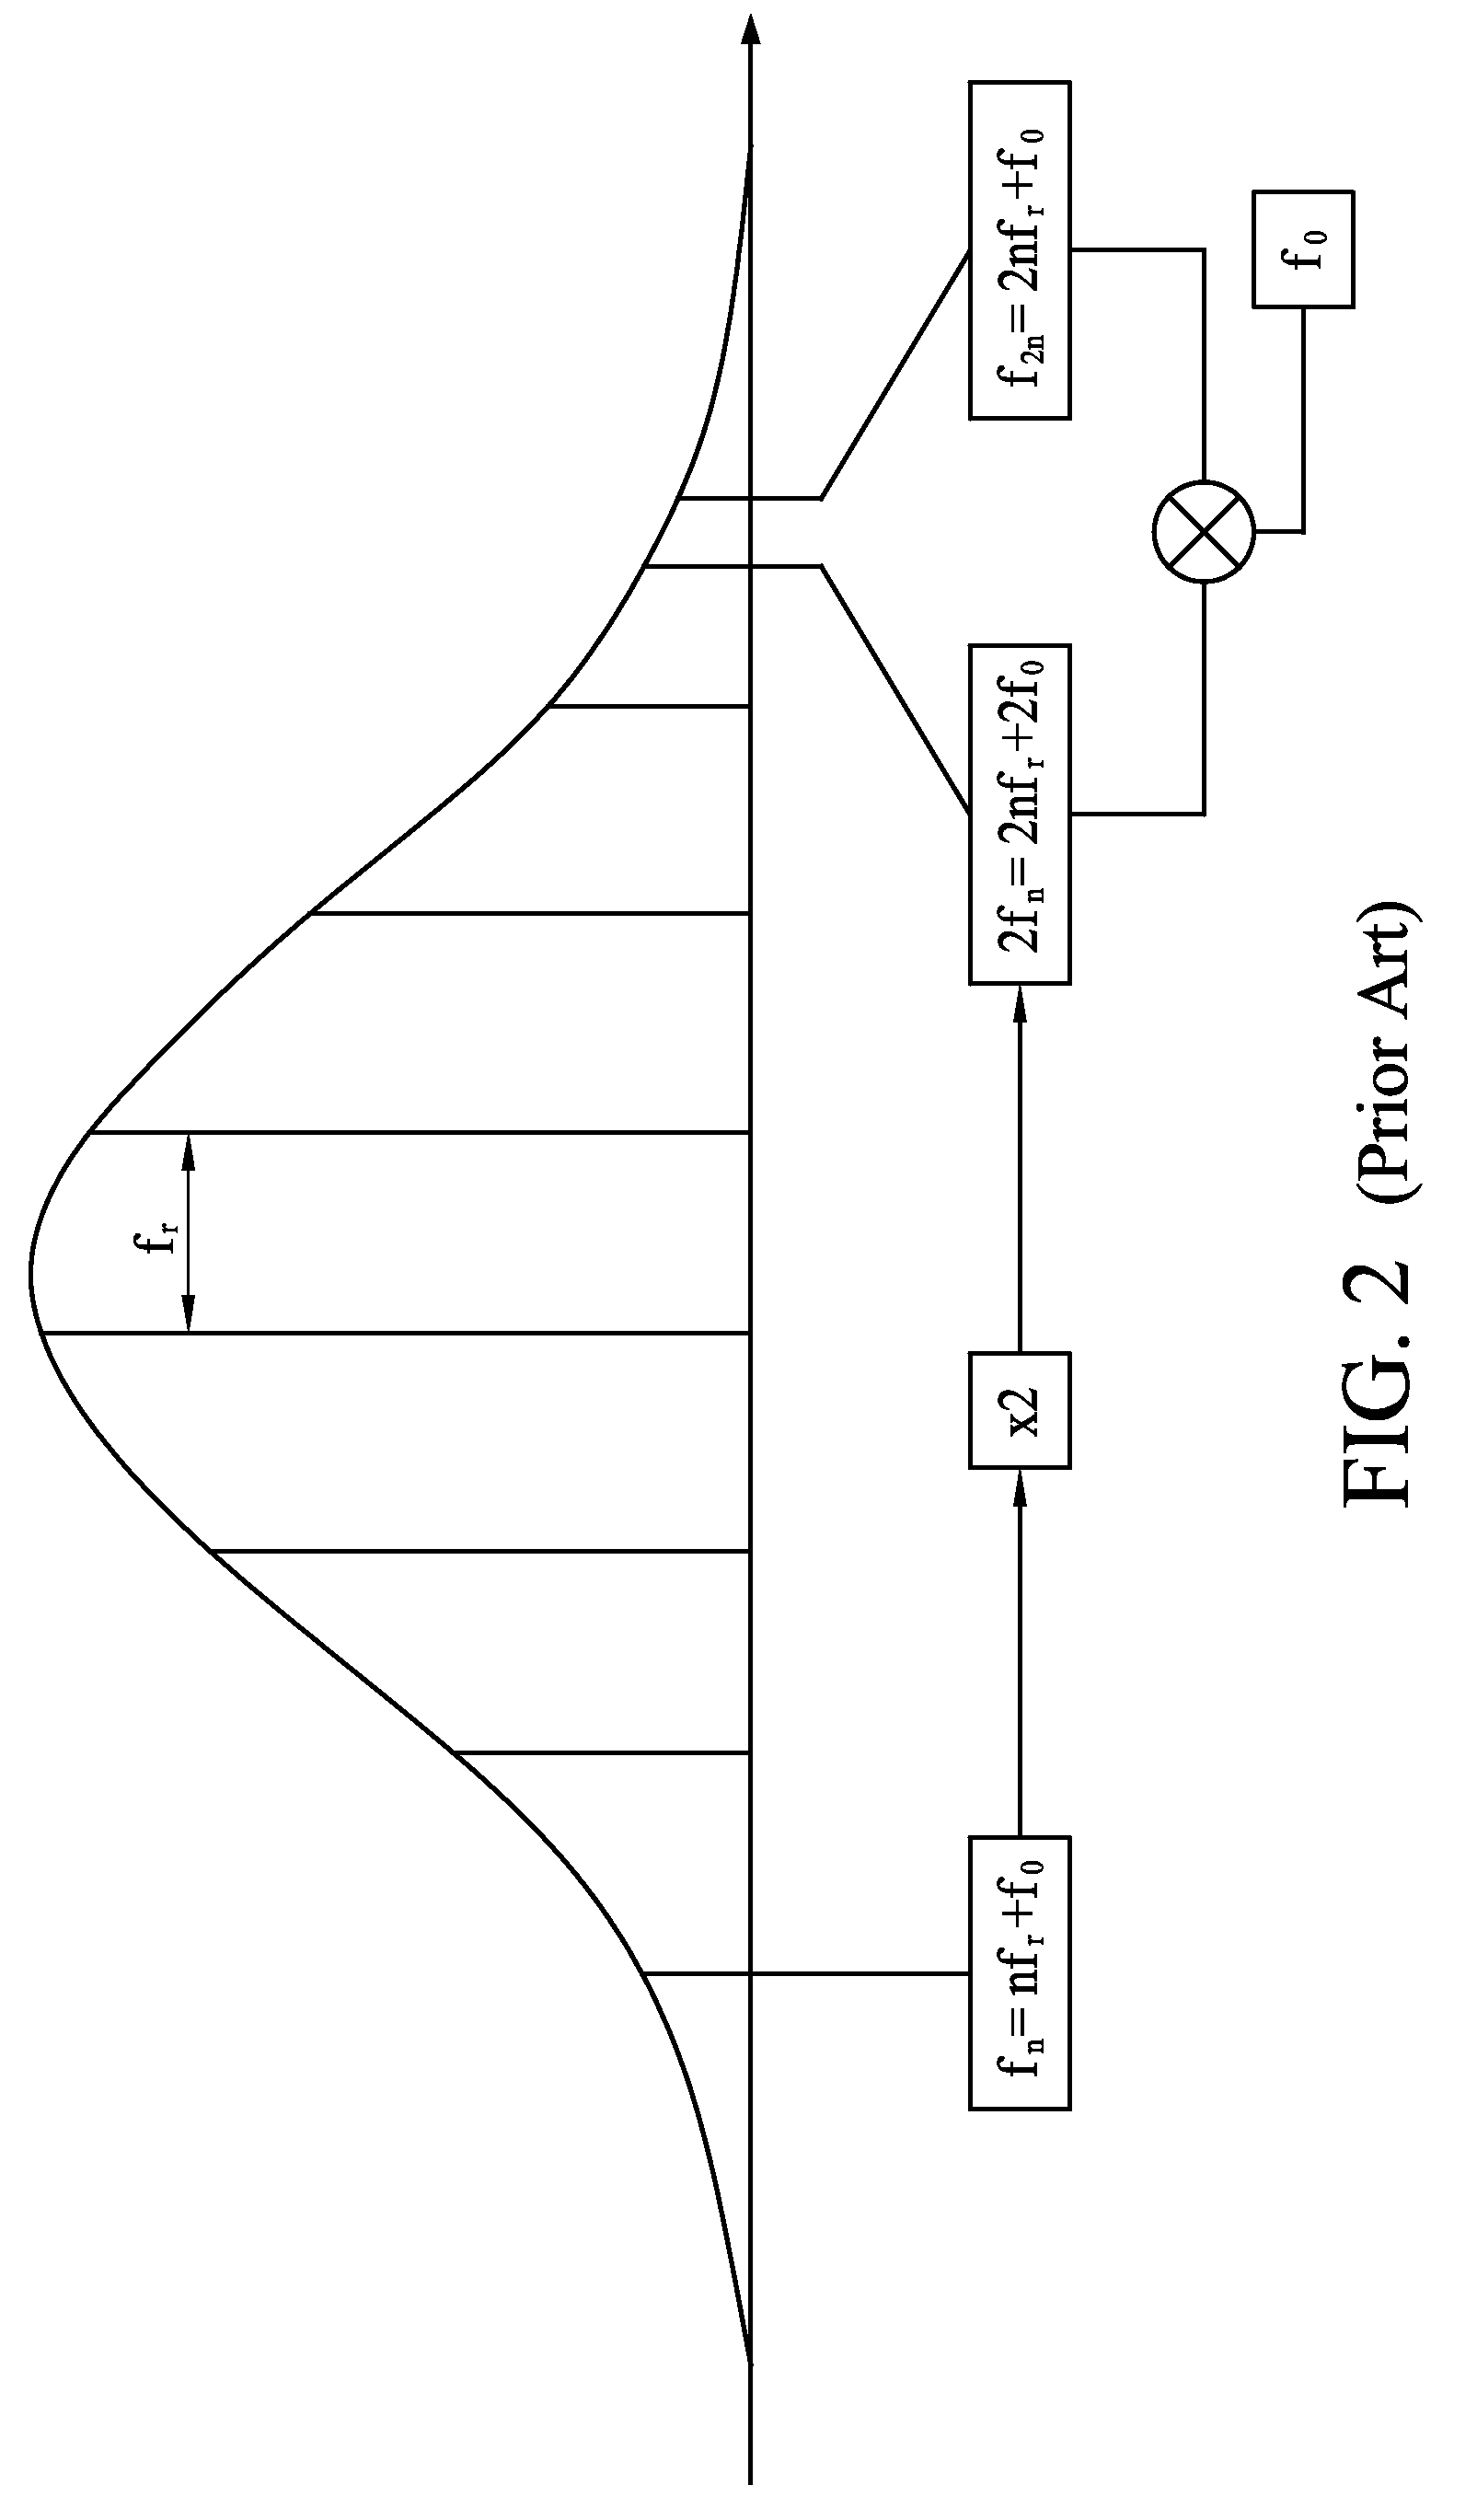 Method of optical frequency measurement